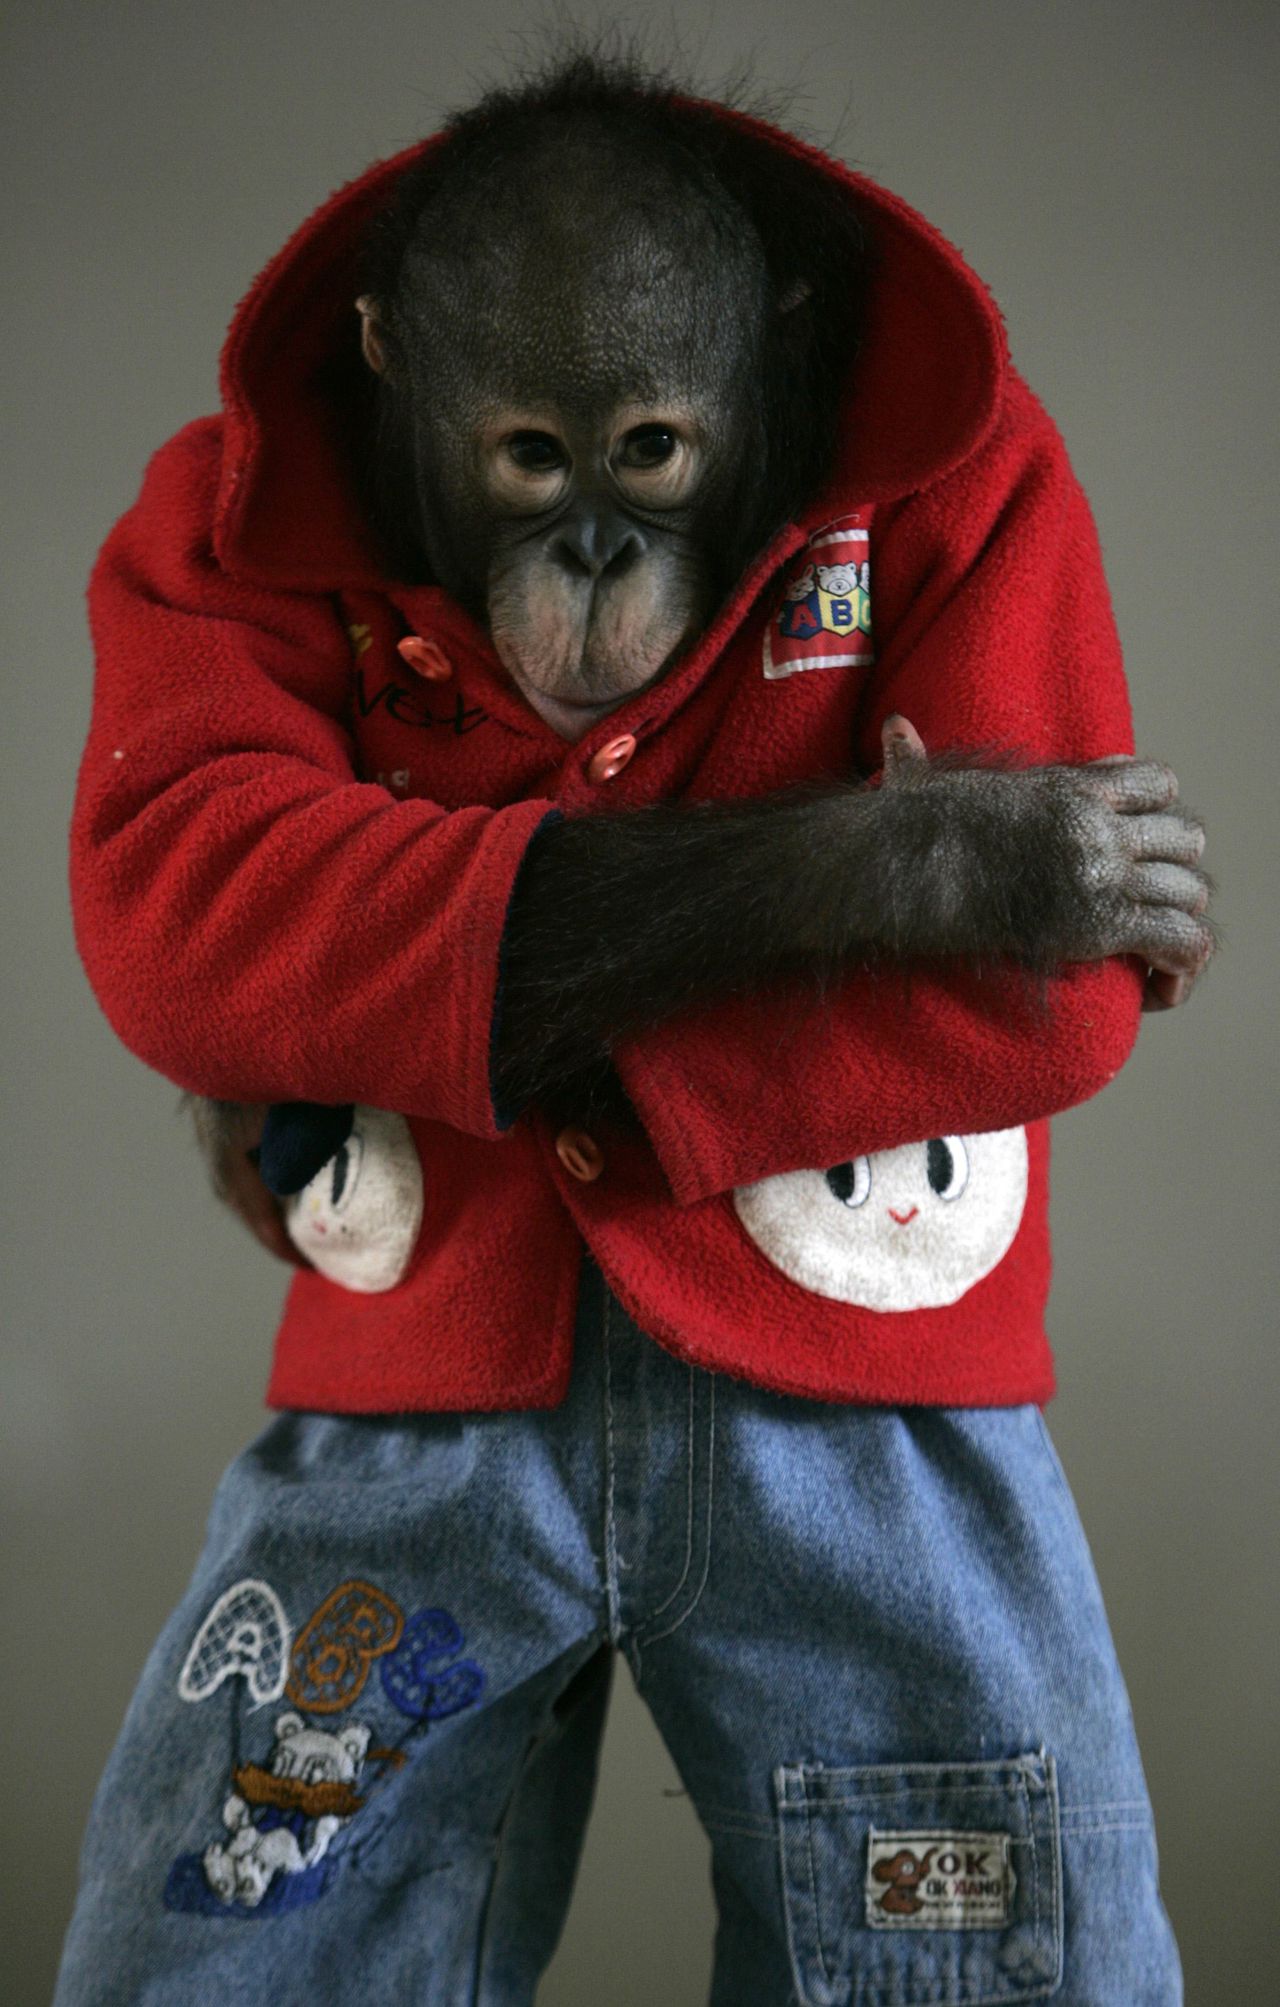 Si Mao, a three-year-old orangutan (Pongo pygmaeus), practices standing while wearing clothes at a zoo in Nanning, capital of the Guangxi Zhuang Autonomous region in southern China, February 10, 2007. REUTERS/Jason Lee (CHINA)